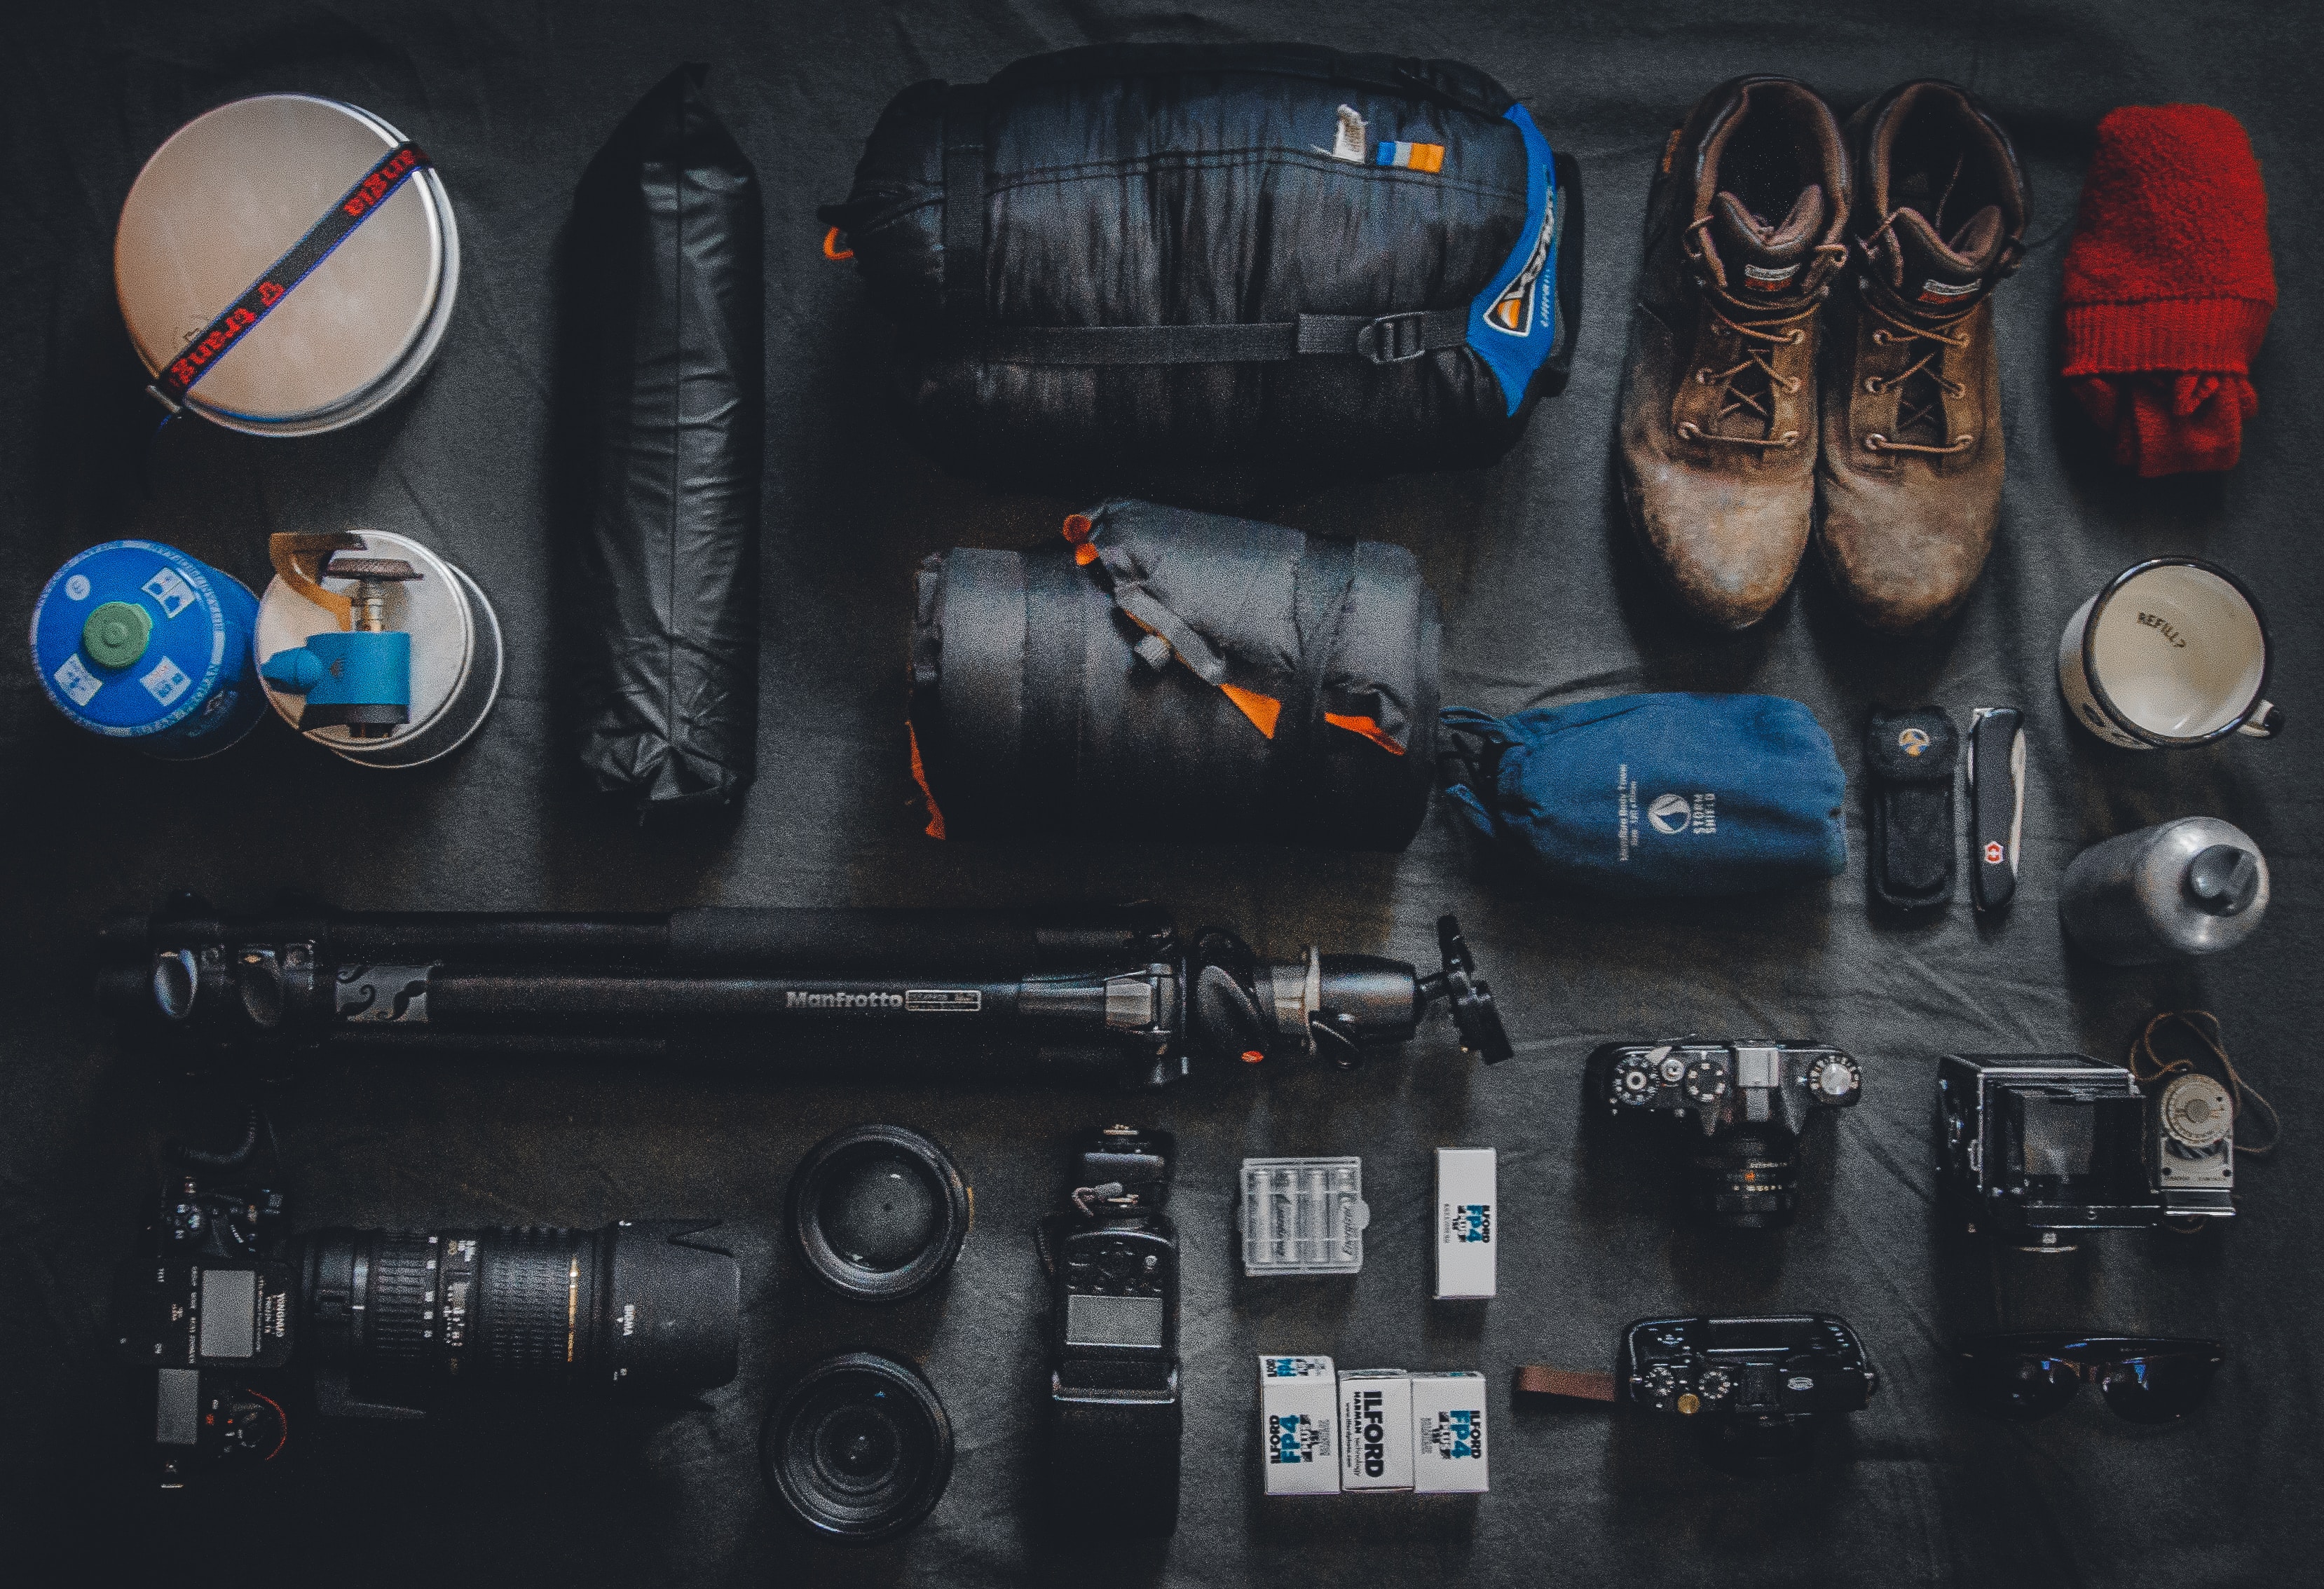 Trekking Photography: Gear & Packing Tips from a Pro